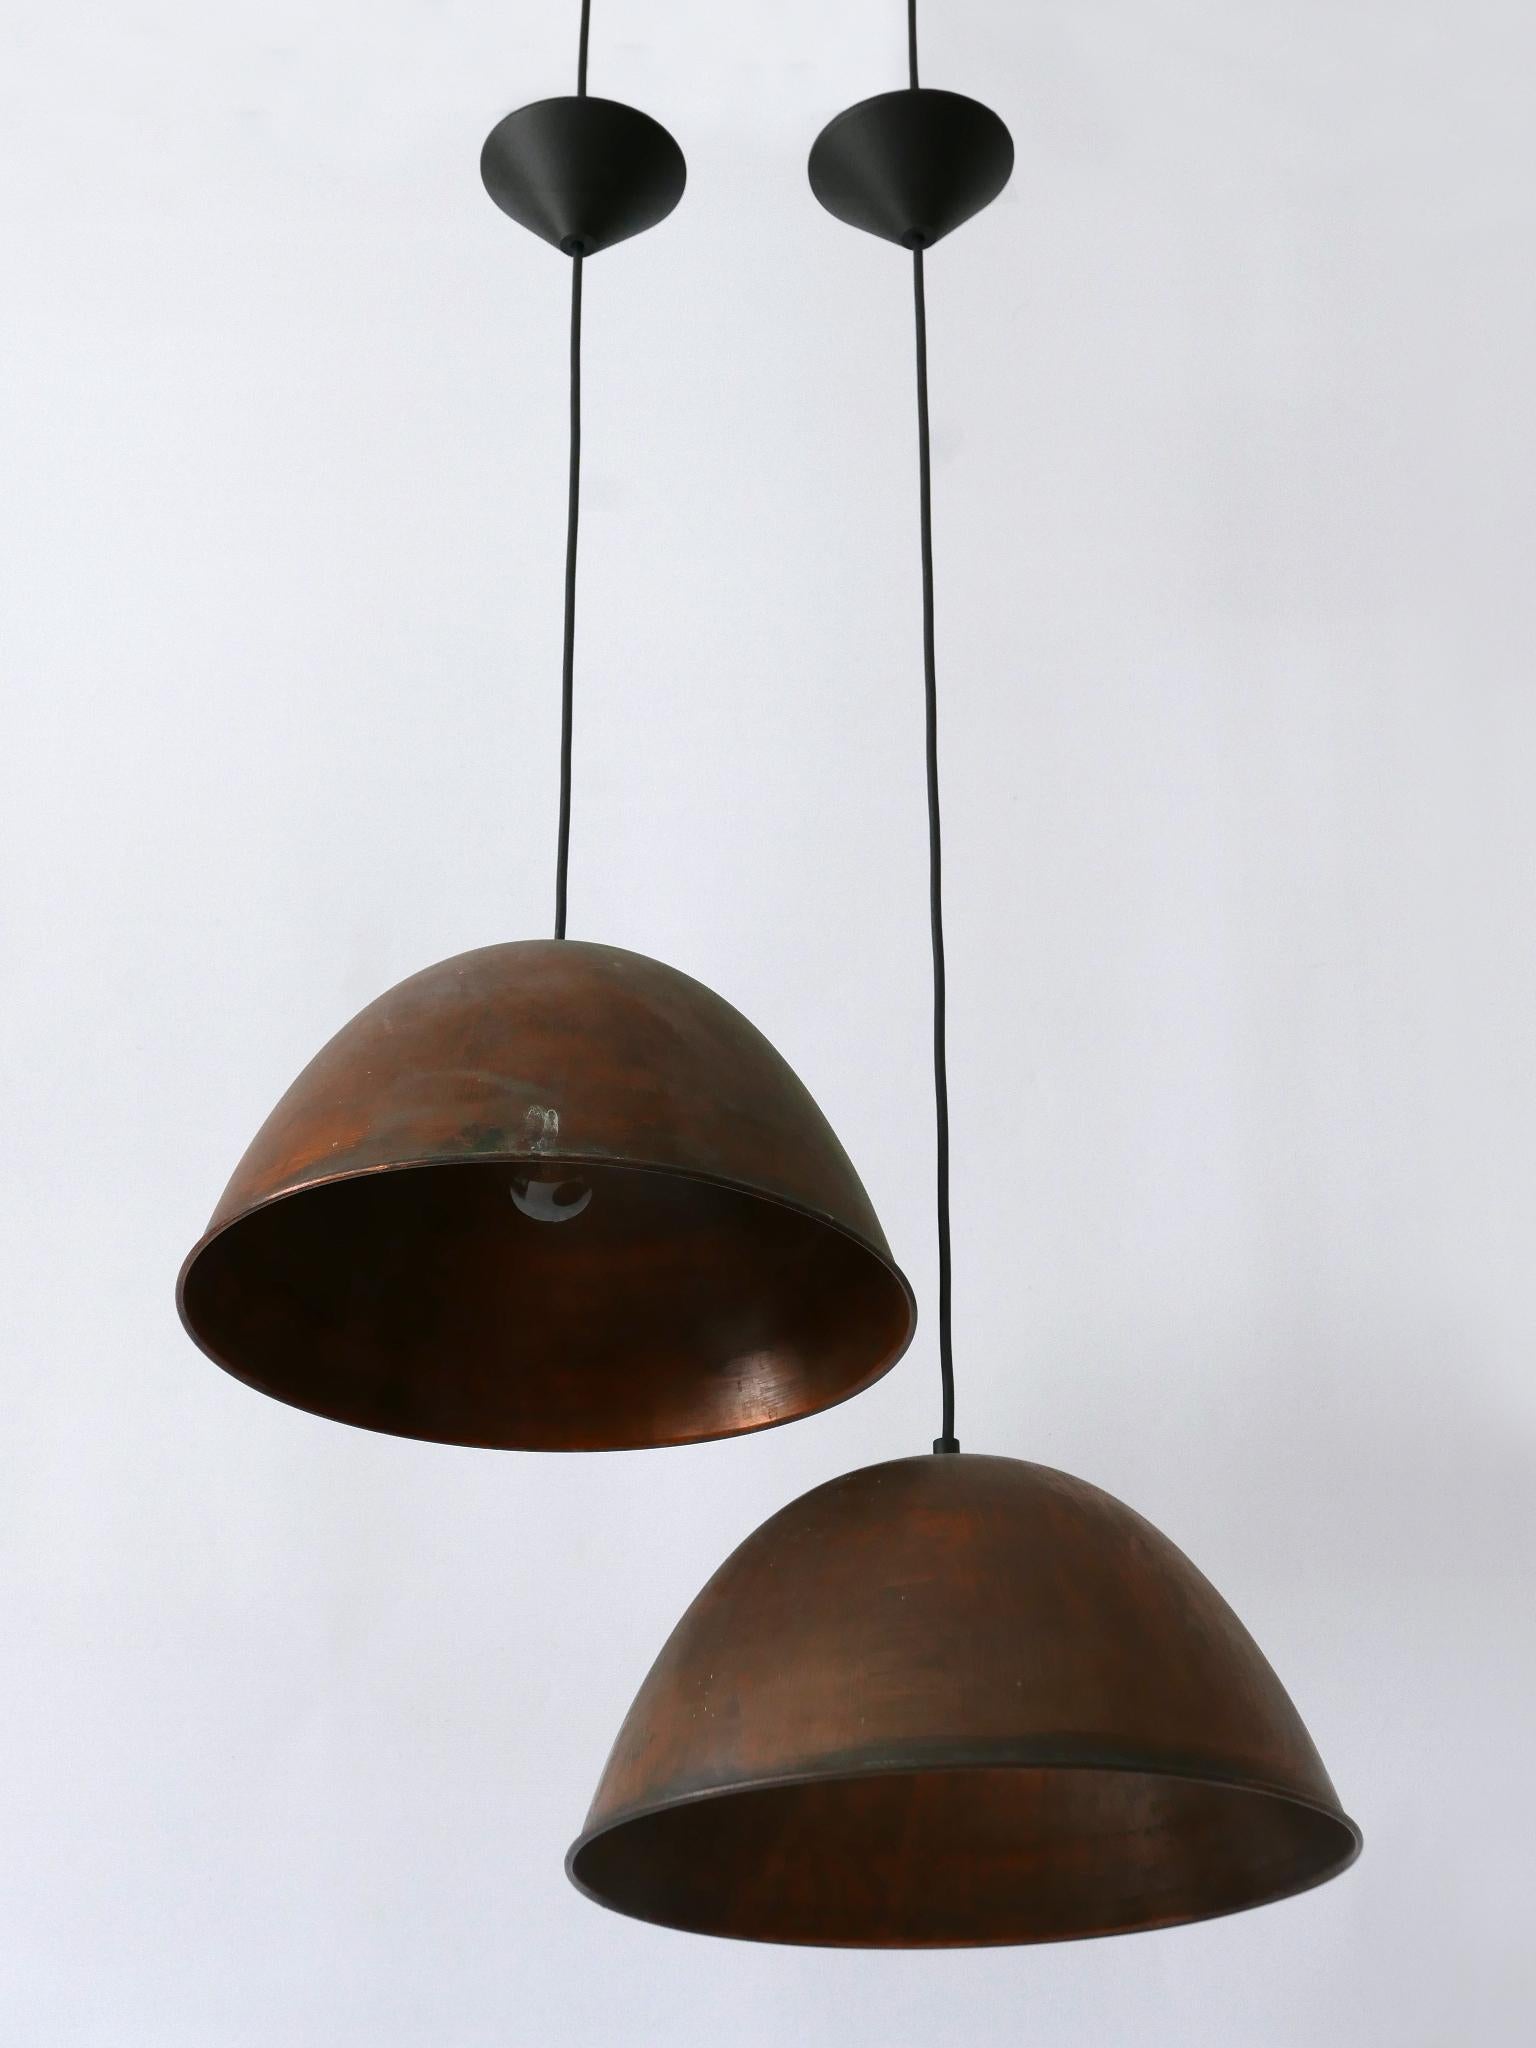 Set of Two Mid-Century Modern Copper Pendant Lamps or Hanging Lights 1950s For Sale 6